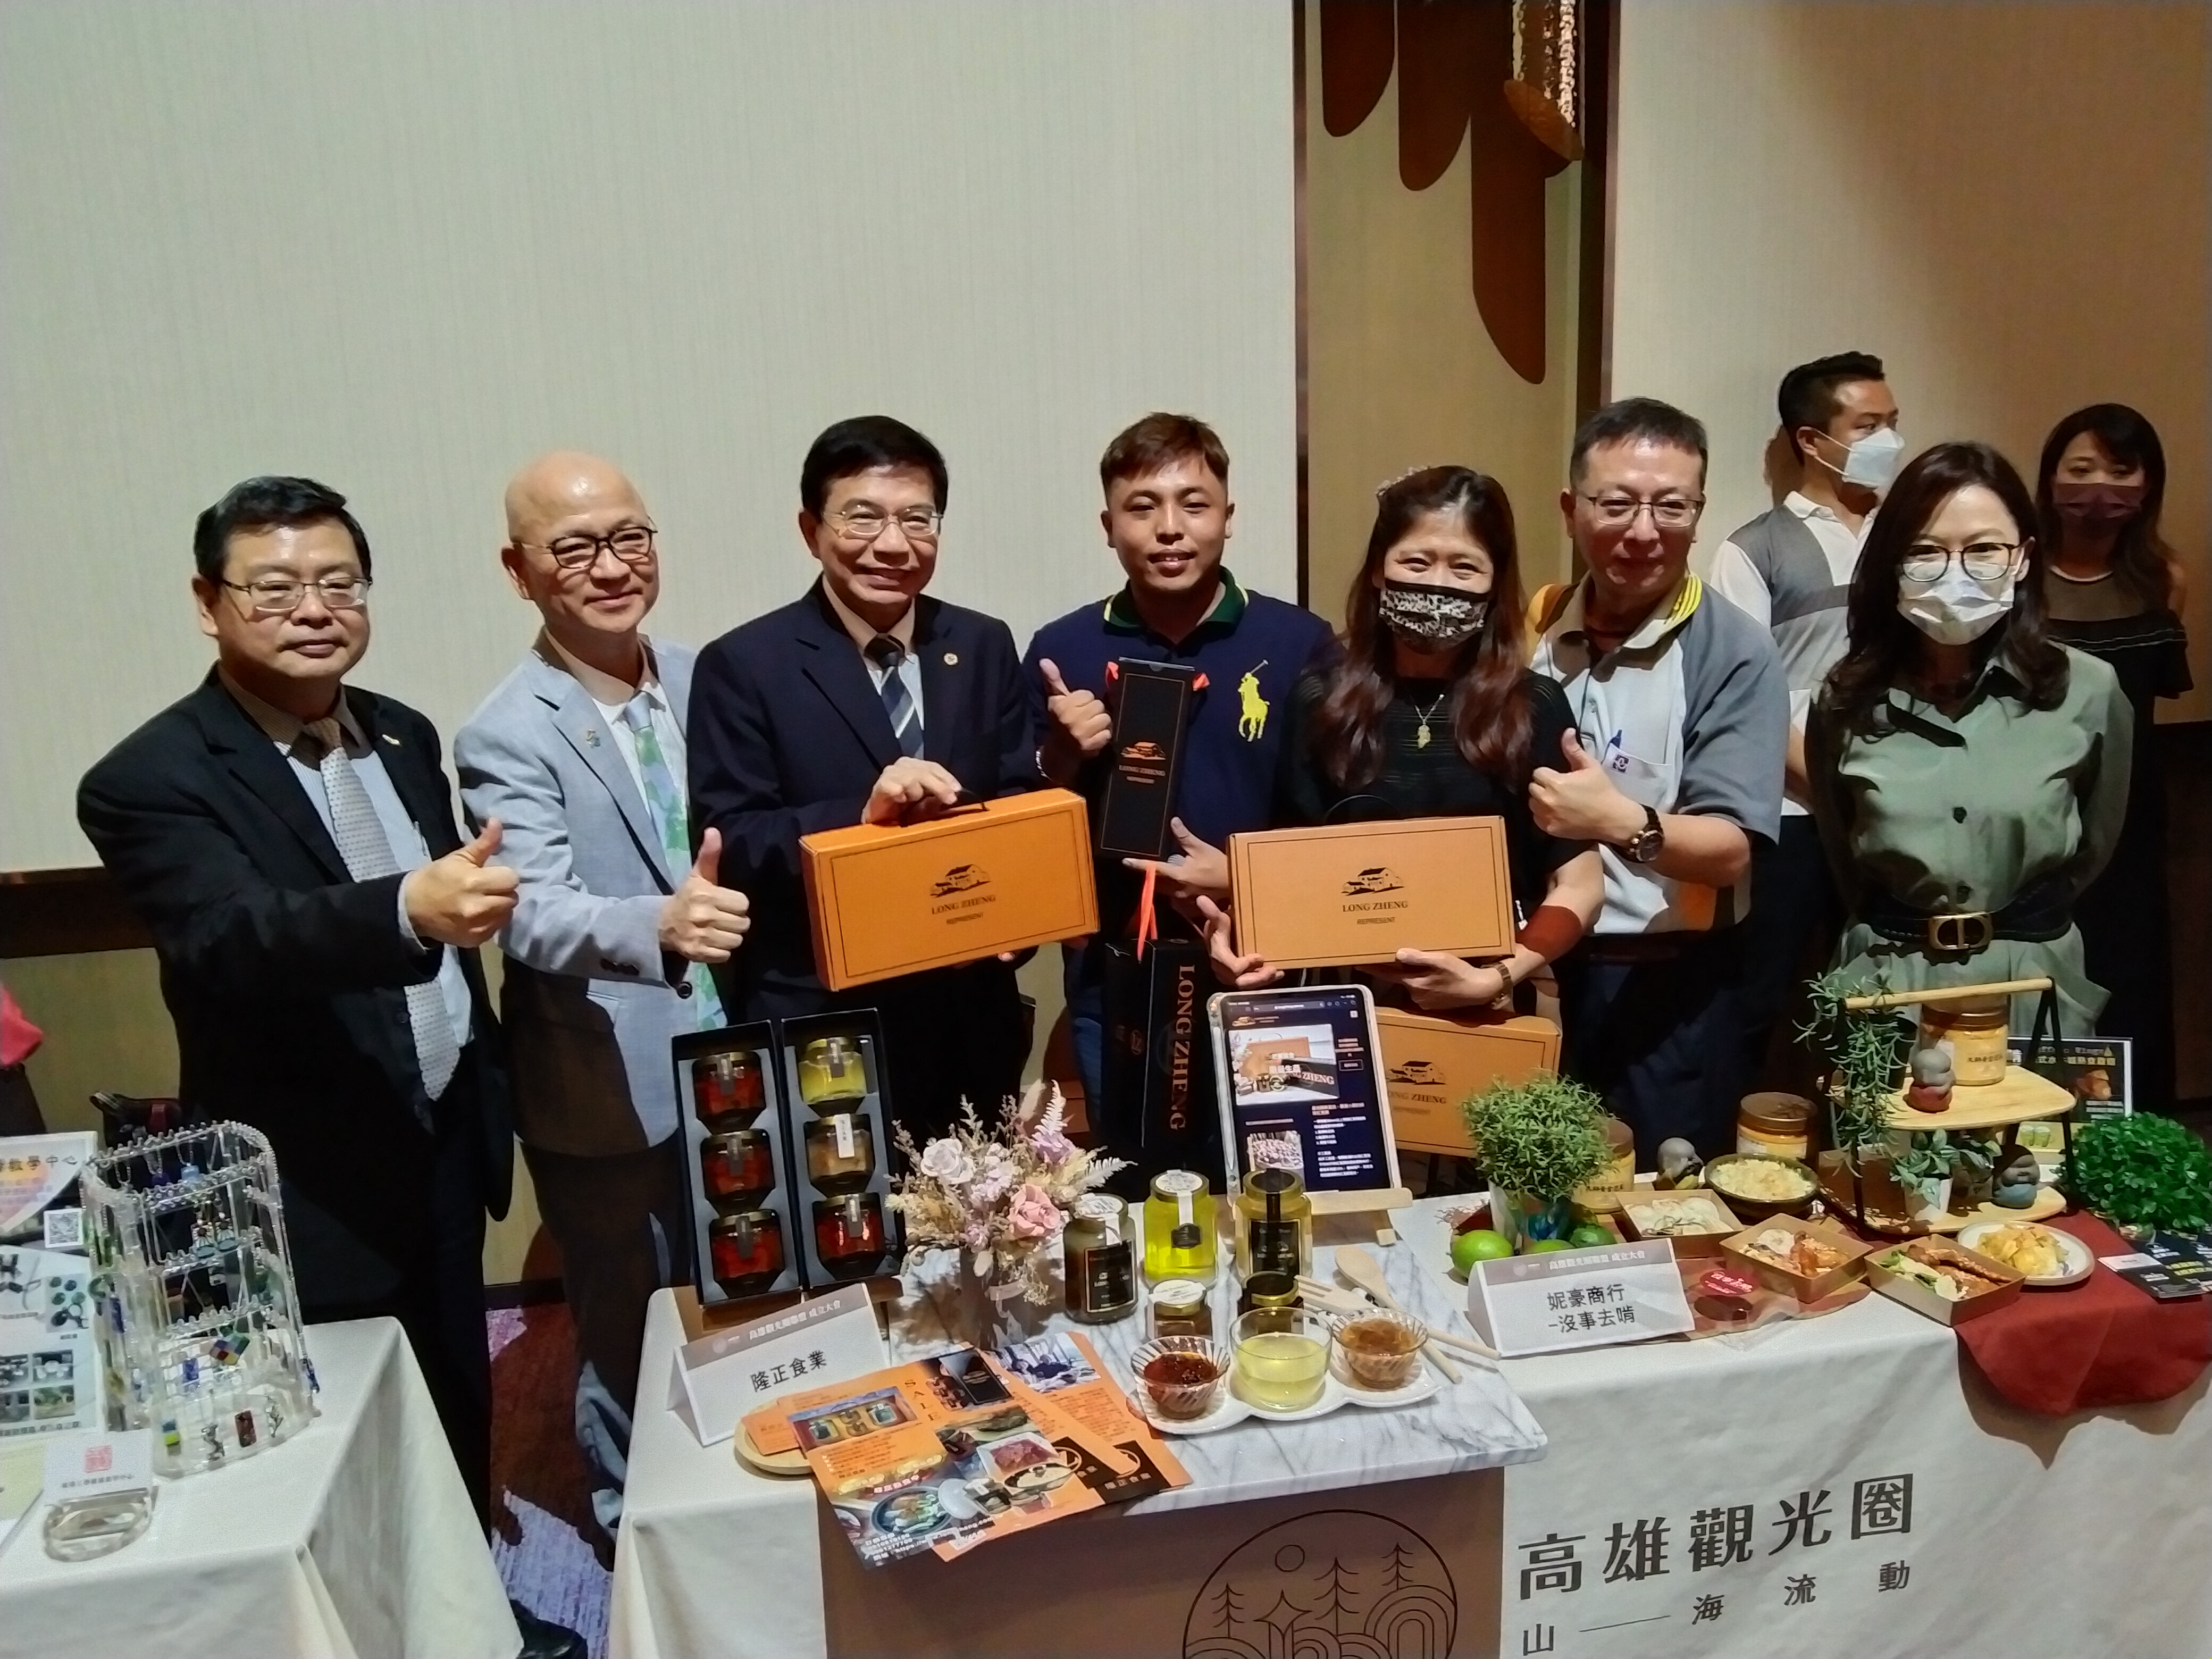 "Kaohsiung Destination Marketing Organization" integrates tourism resources of Kaohsiung City and three townships in Northern Pingtung to create a brand of Kaohsiung Destination Marketing Organization based on the concept of "Mountain - Sea Flow".